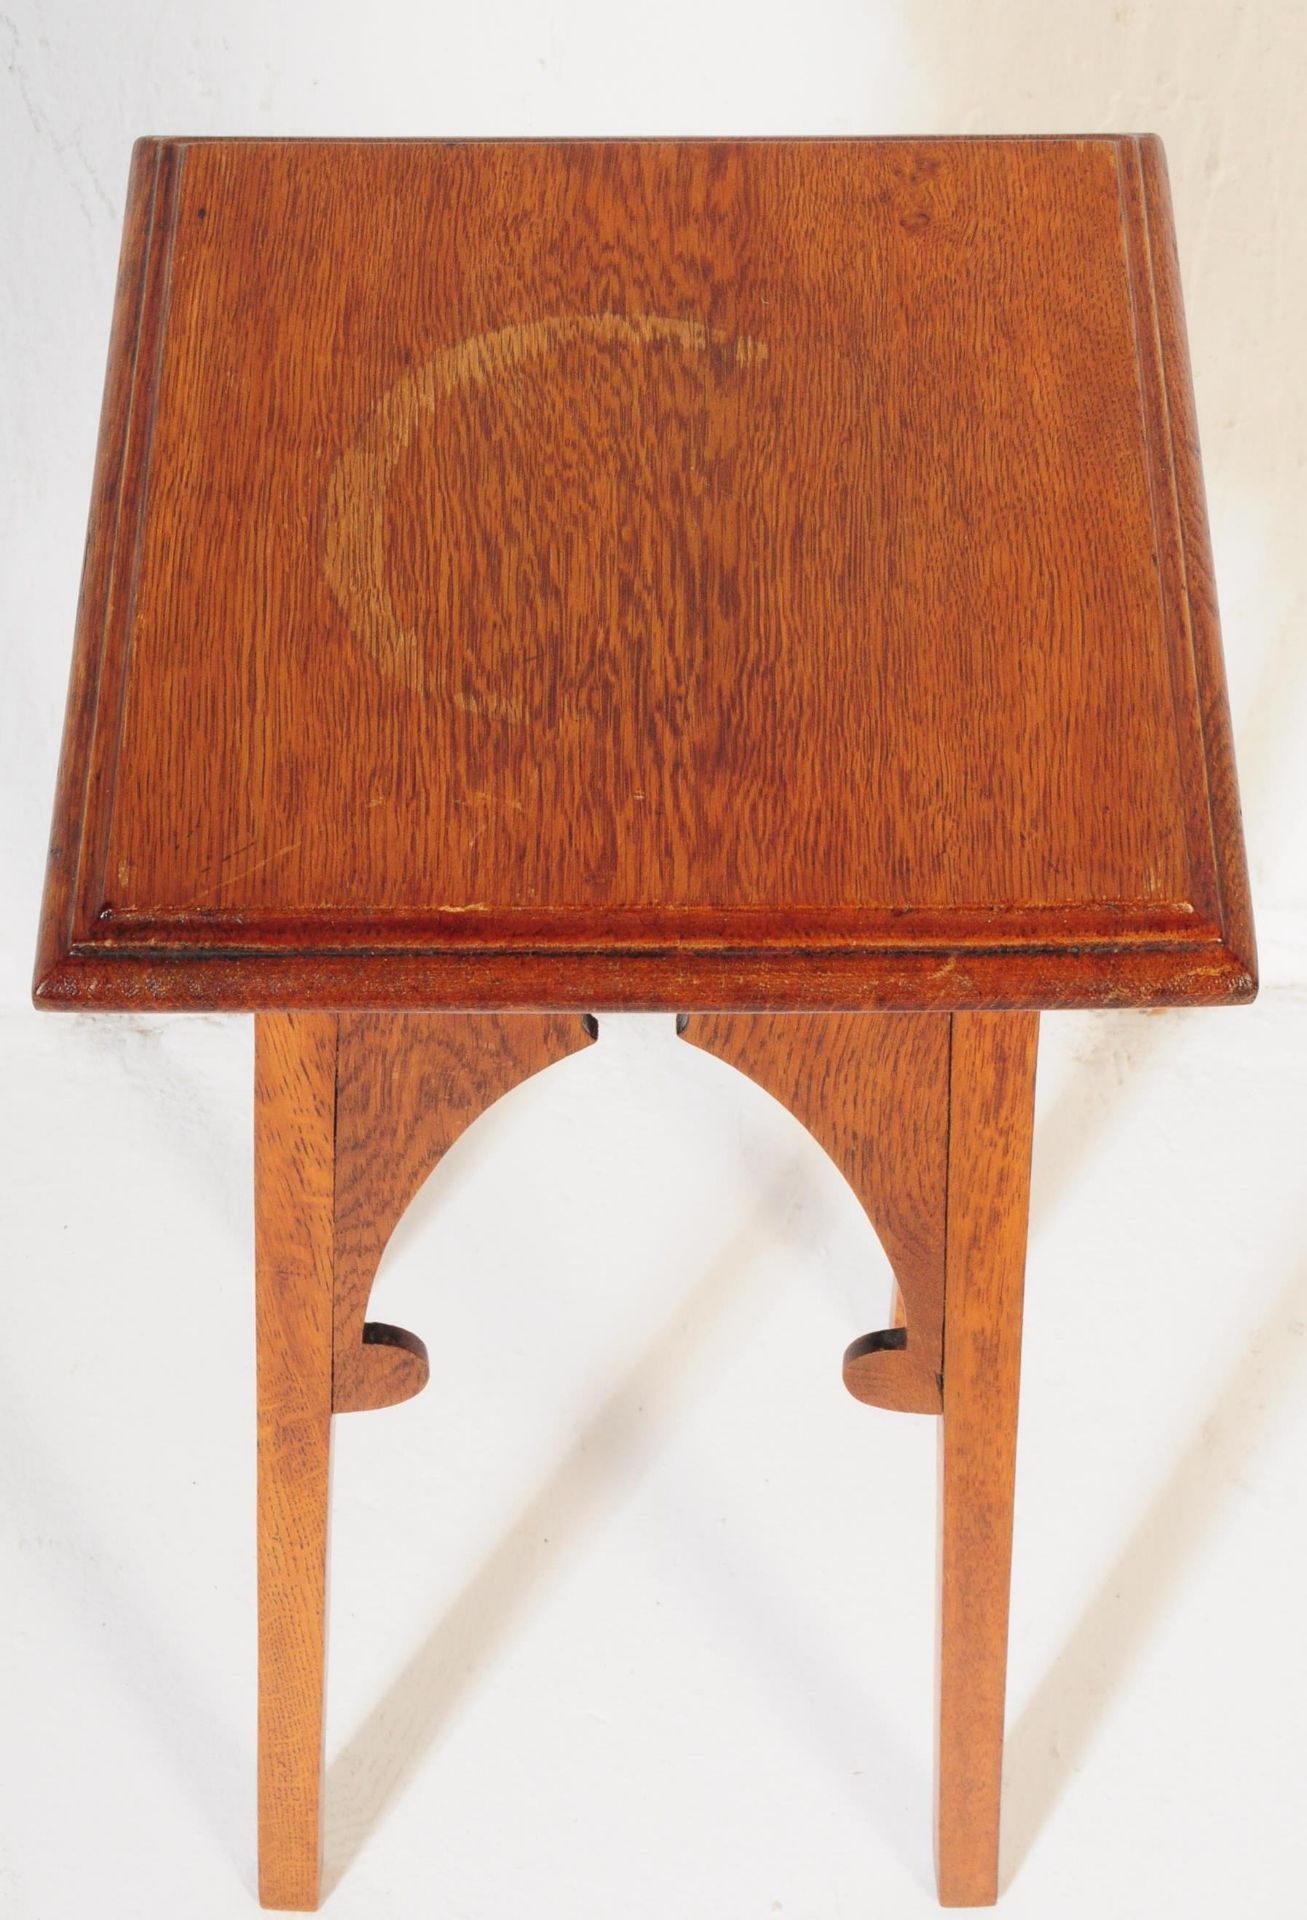 EARLY 20TH CENTURY ARTS & CRAFTS MOORISH STYLE PLANT STAND - Image 4 of 5